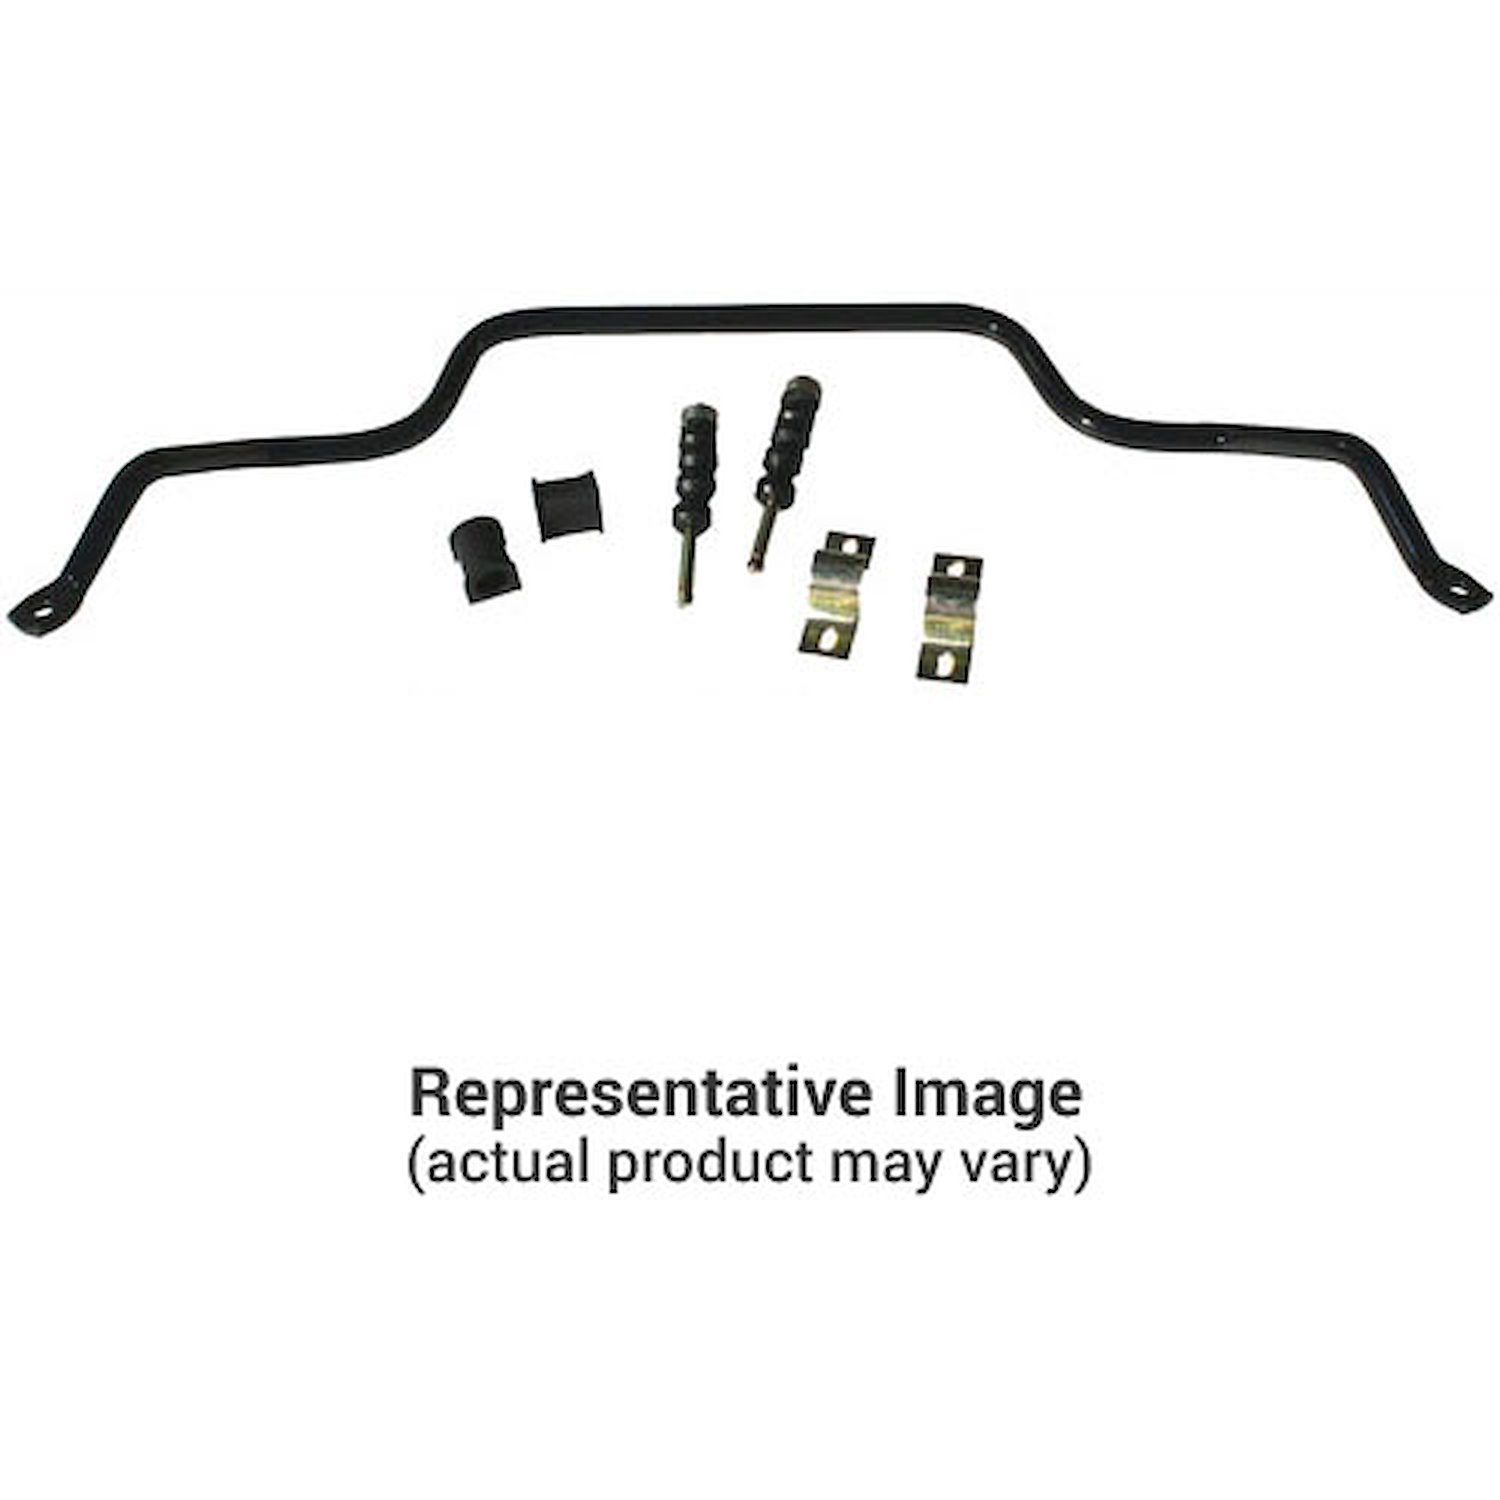 1" Rear Sway Bar 1998-10 New Beetle, Jetta, Golf (Up to 2" drop)